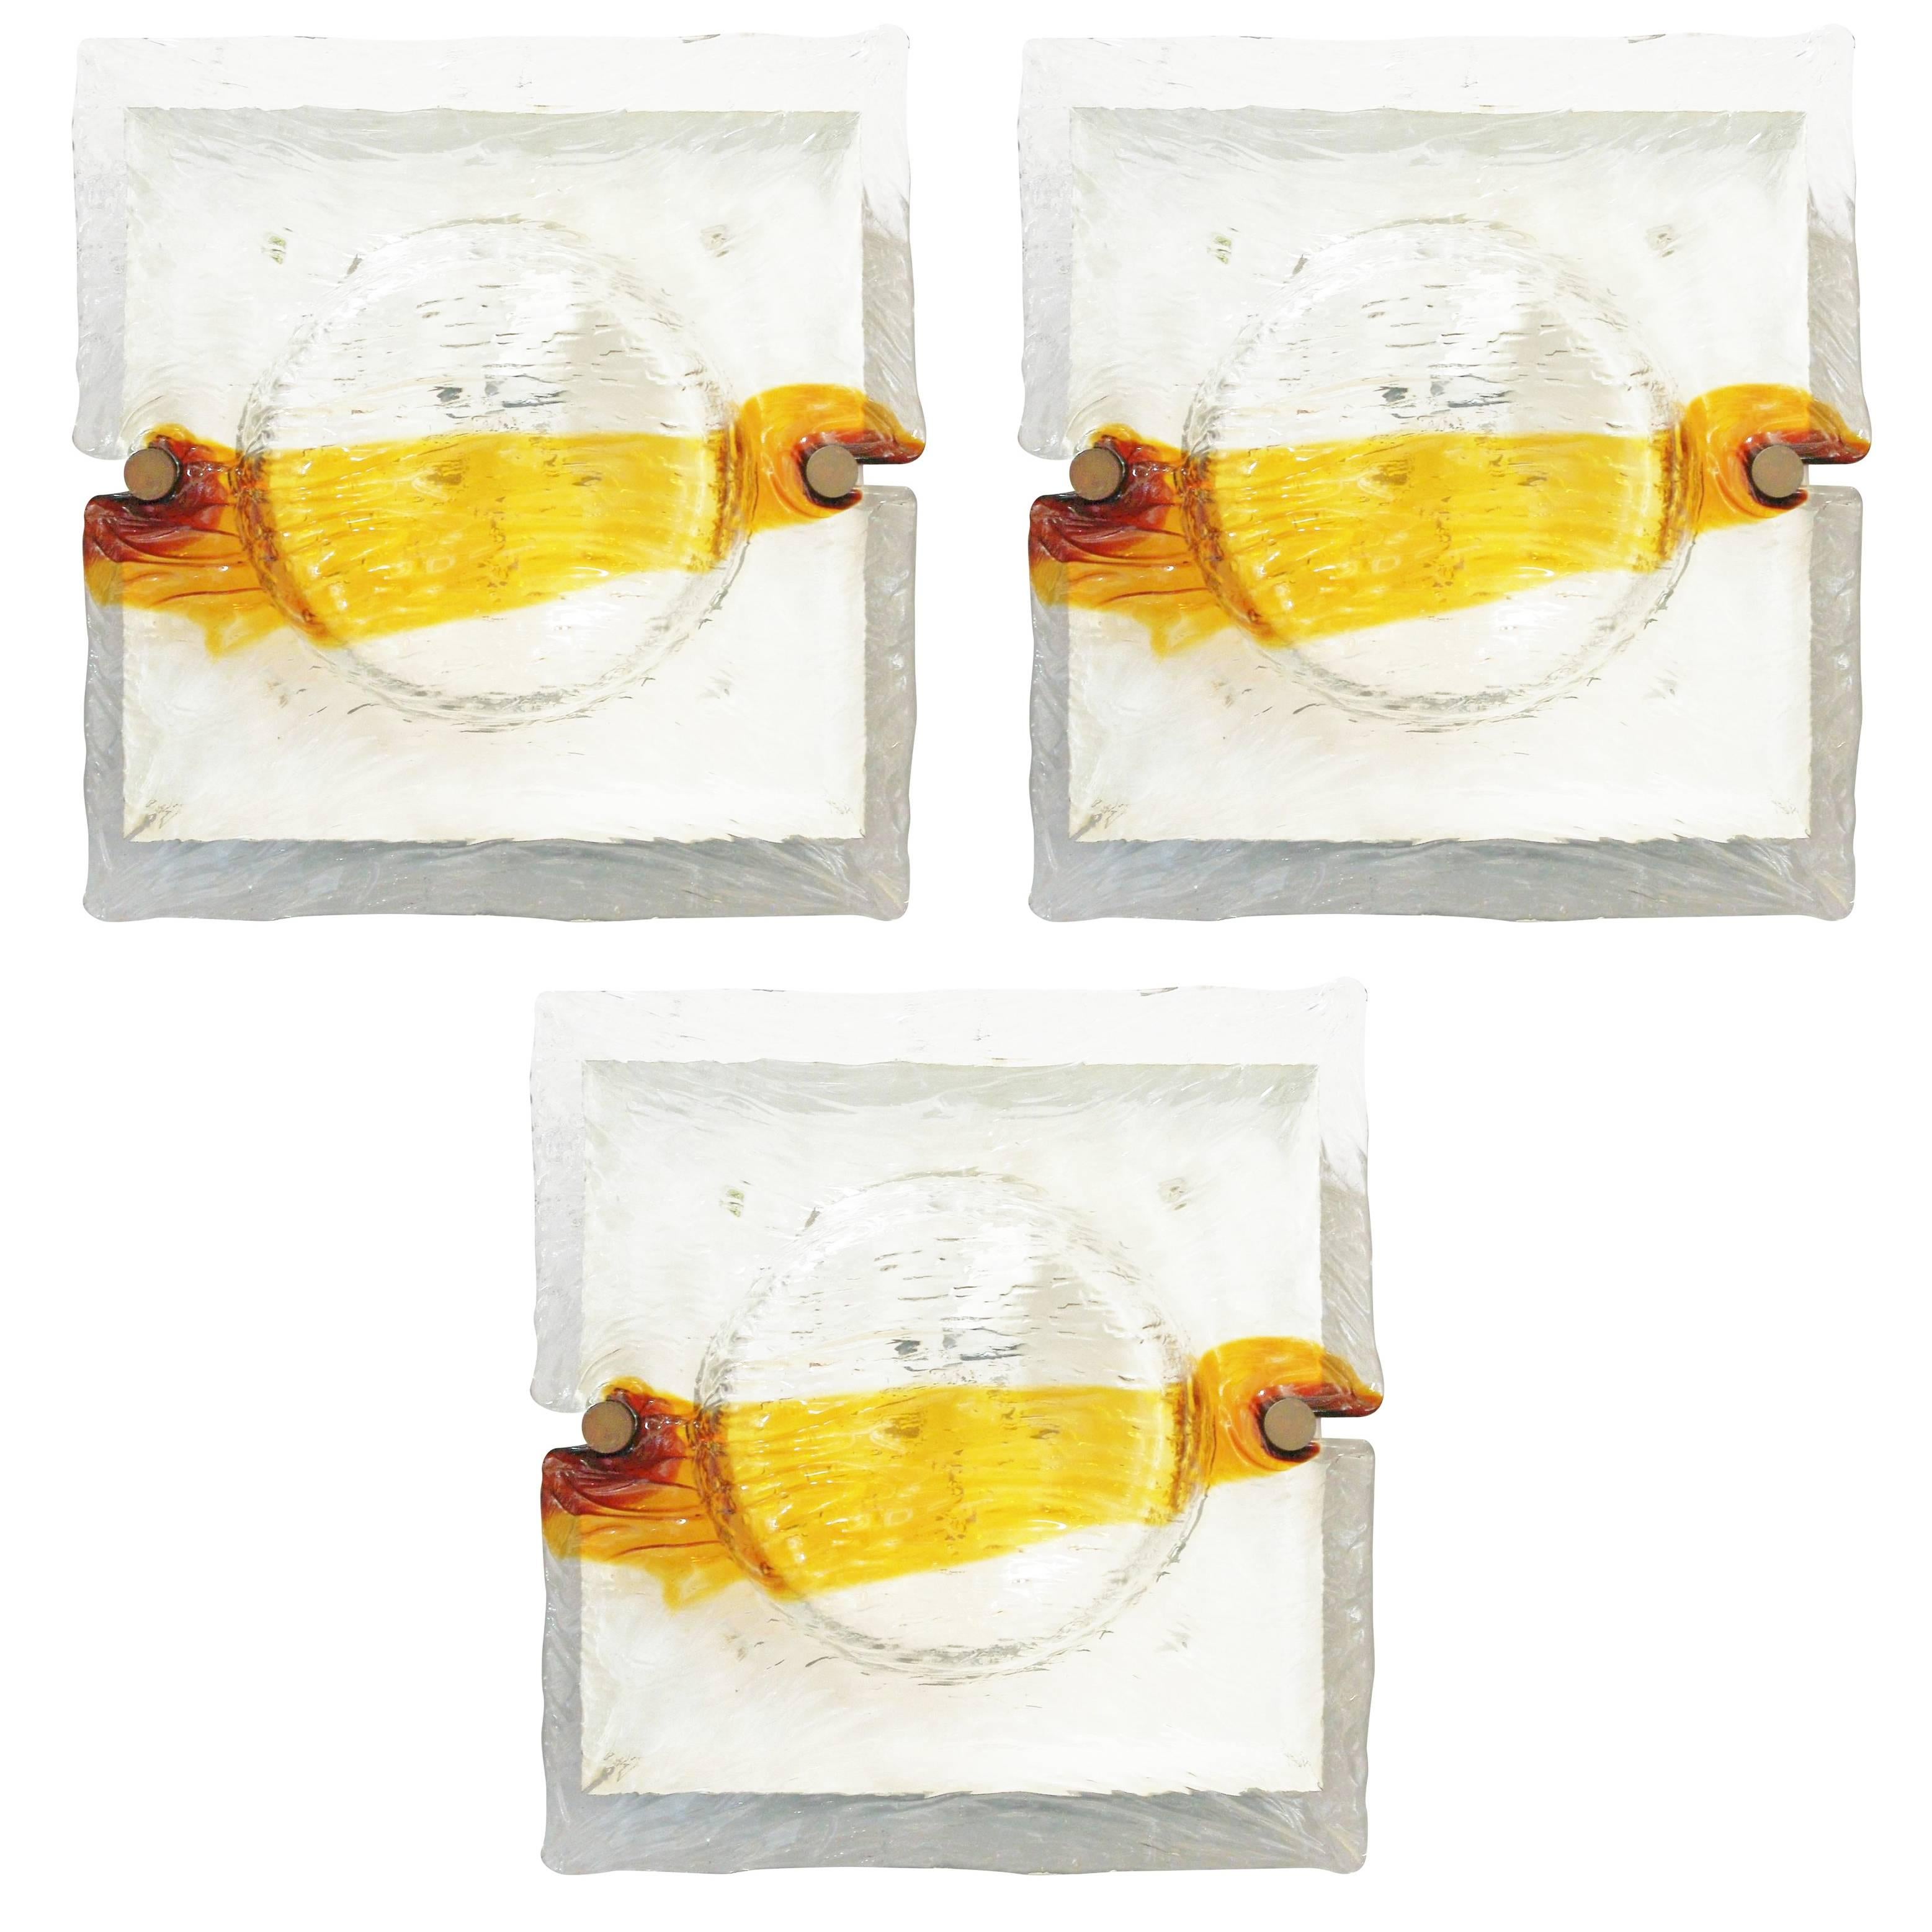 Vintage Italian wall lights or flush mounts with amber and clear Murano glass hand blown in to a quilt-like effect / Designed by Venini, circa 1960’s / “Venini Murano” mark on the frame / Made in Italy 
1 light / E26 or E27 type /max 60W 
Heigth: 17